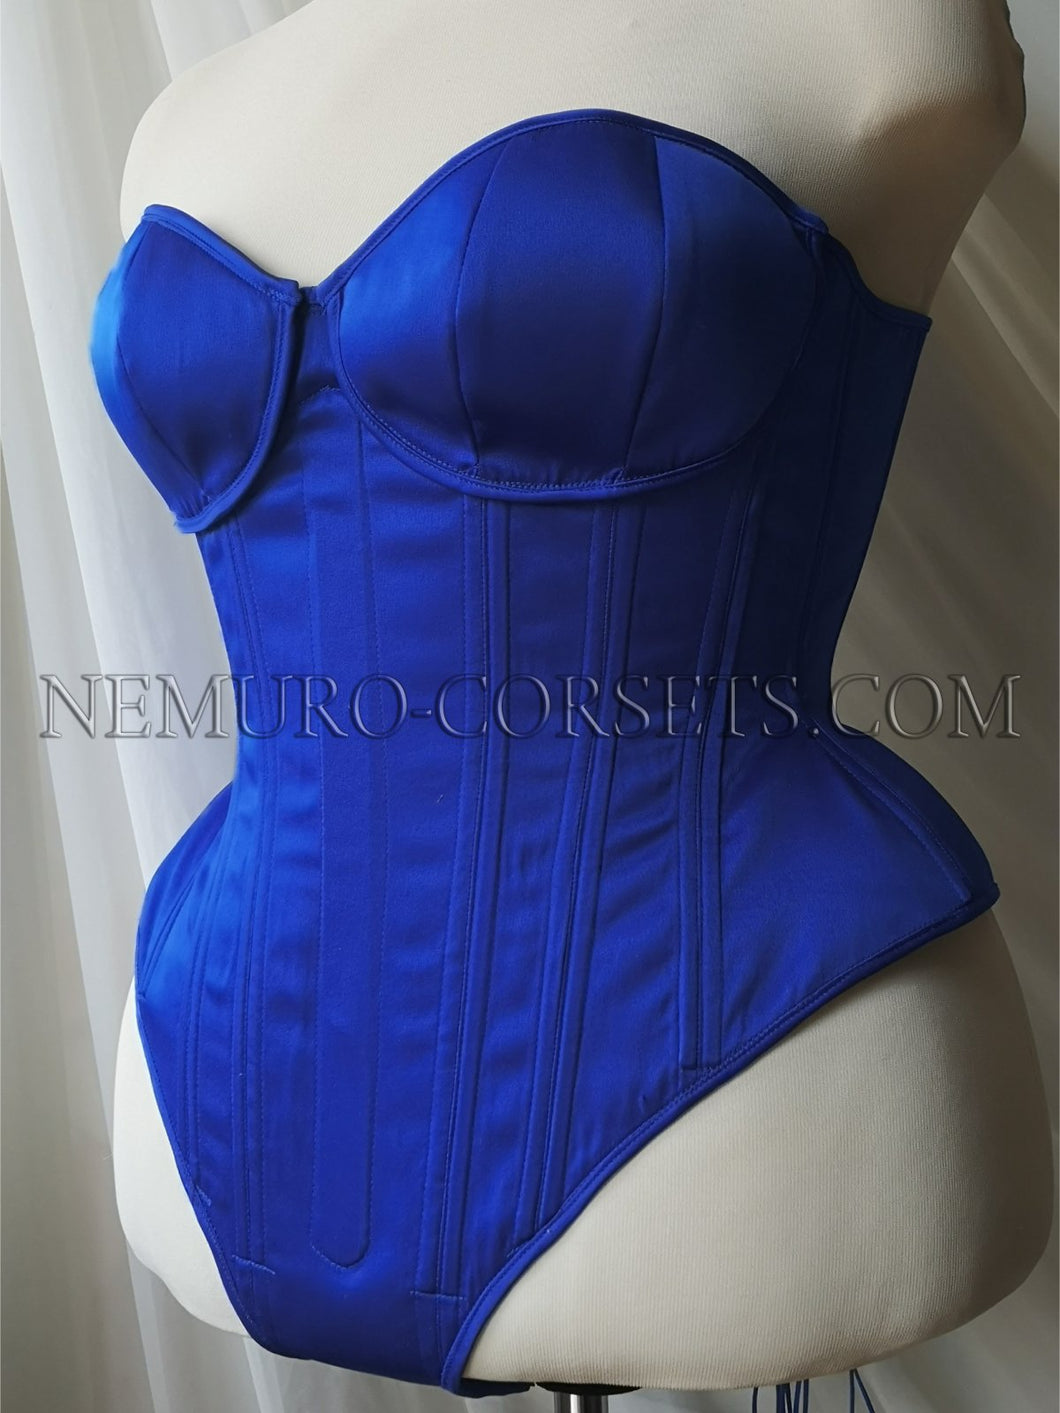 Cupped Bodysuit overbust corset